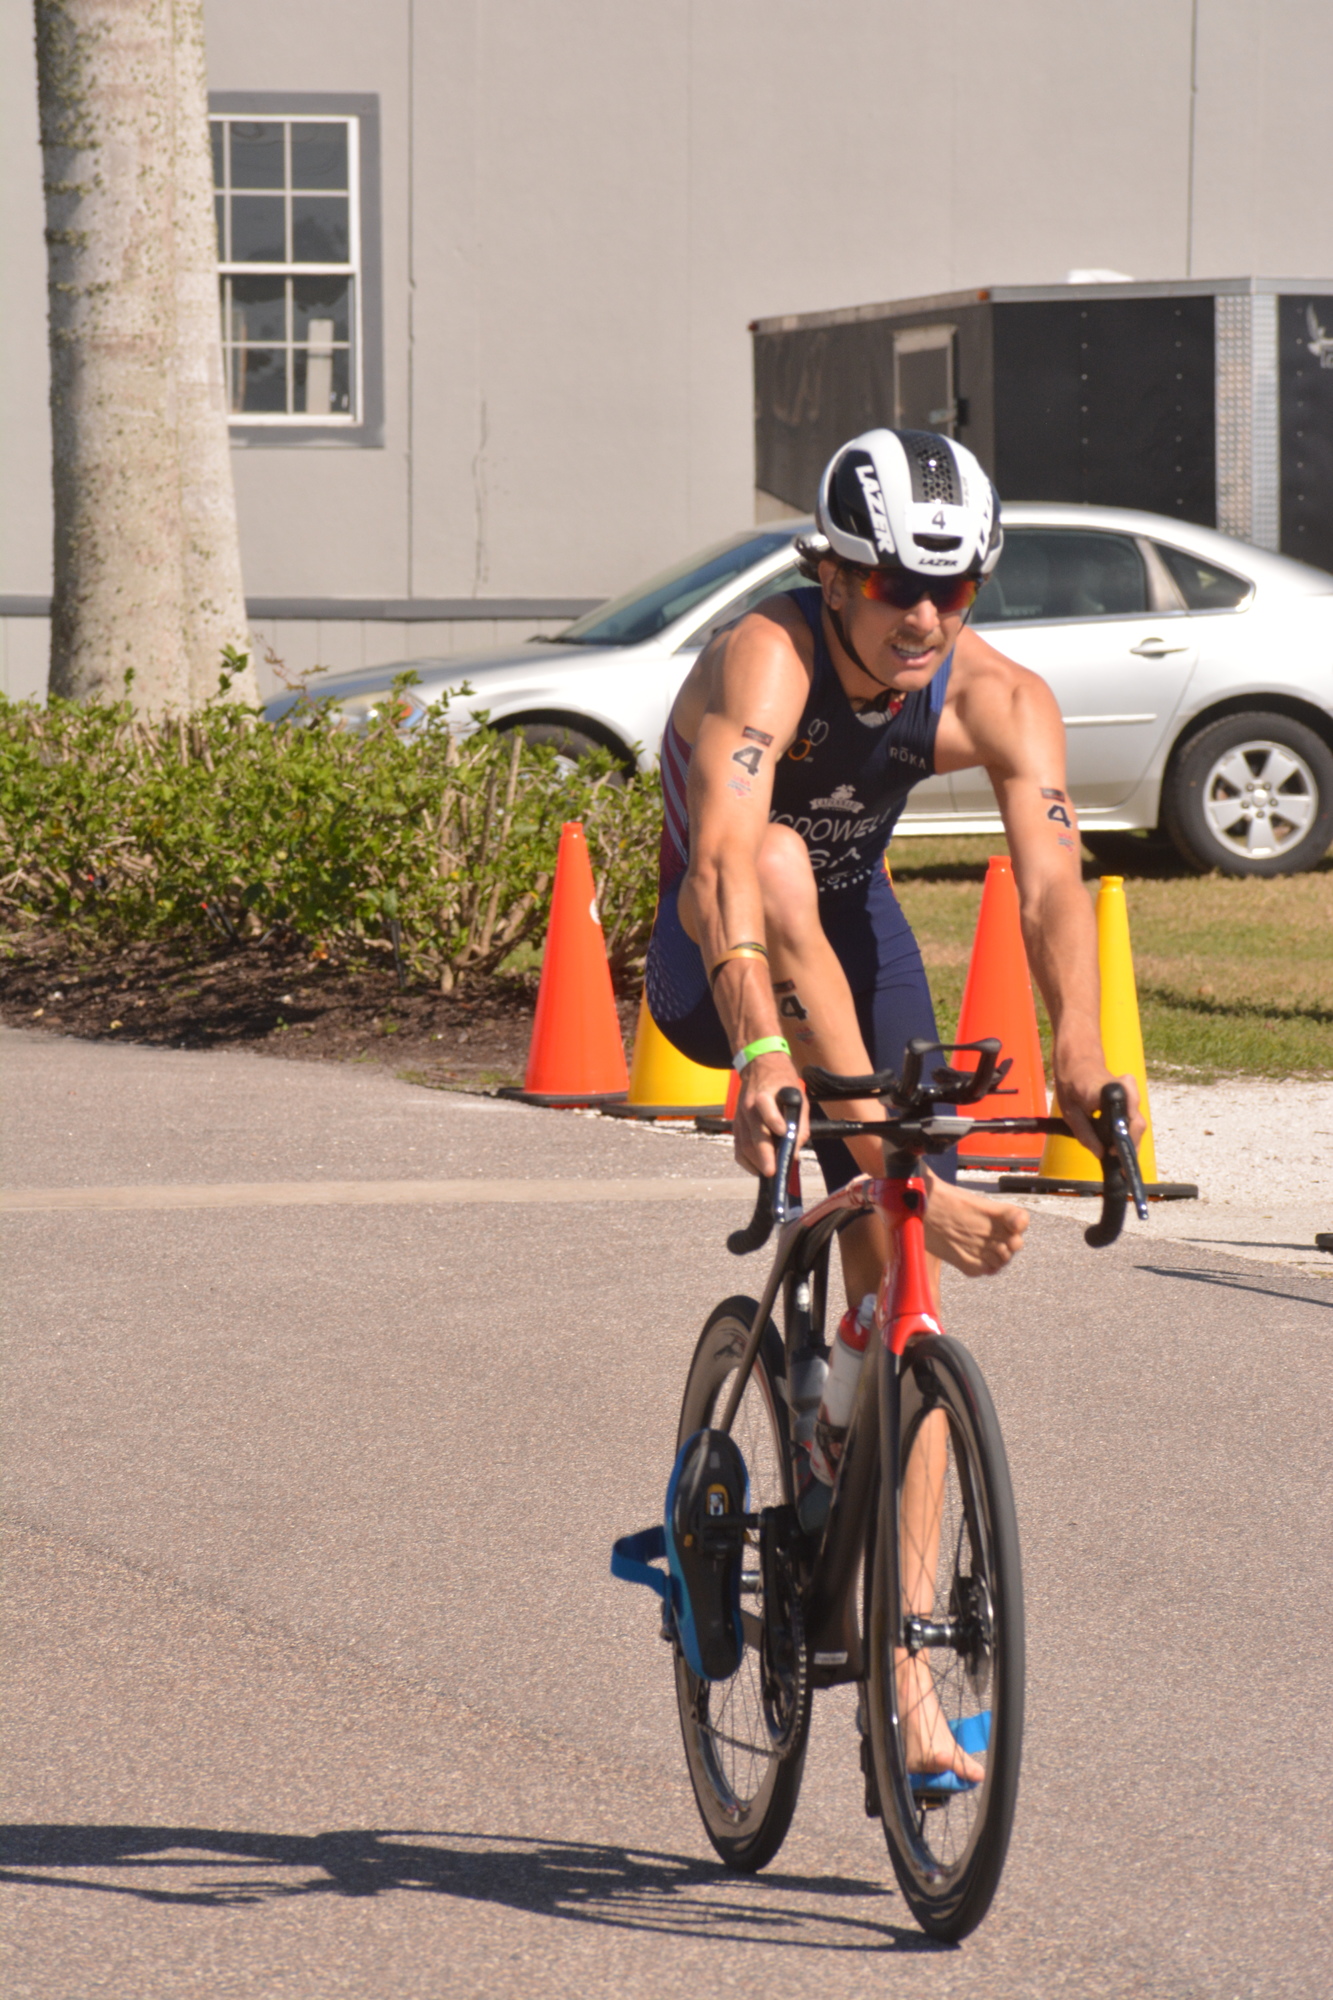 2021 Sarasota-Bradenton Triathlon men's elite division winner Kevin McDowell took control during the bike section and never relinquished it.